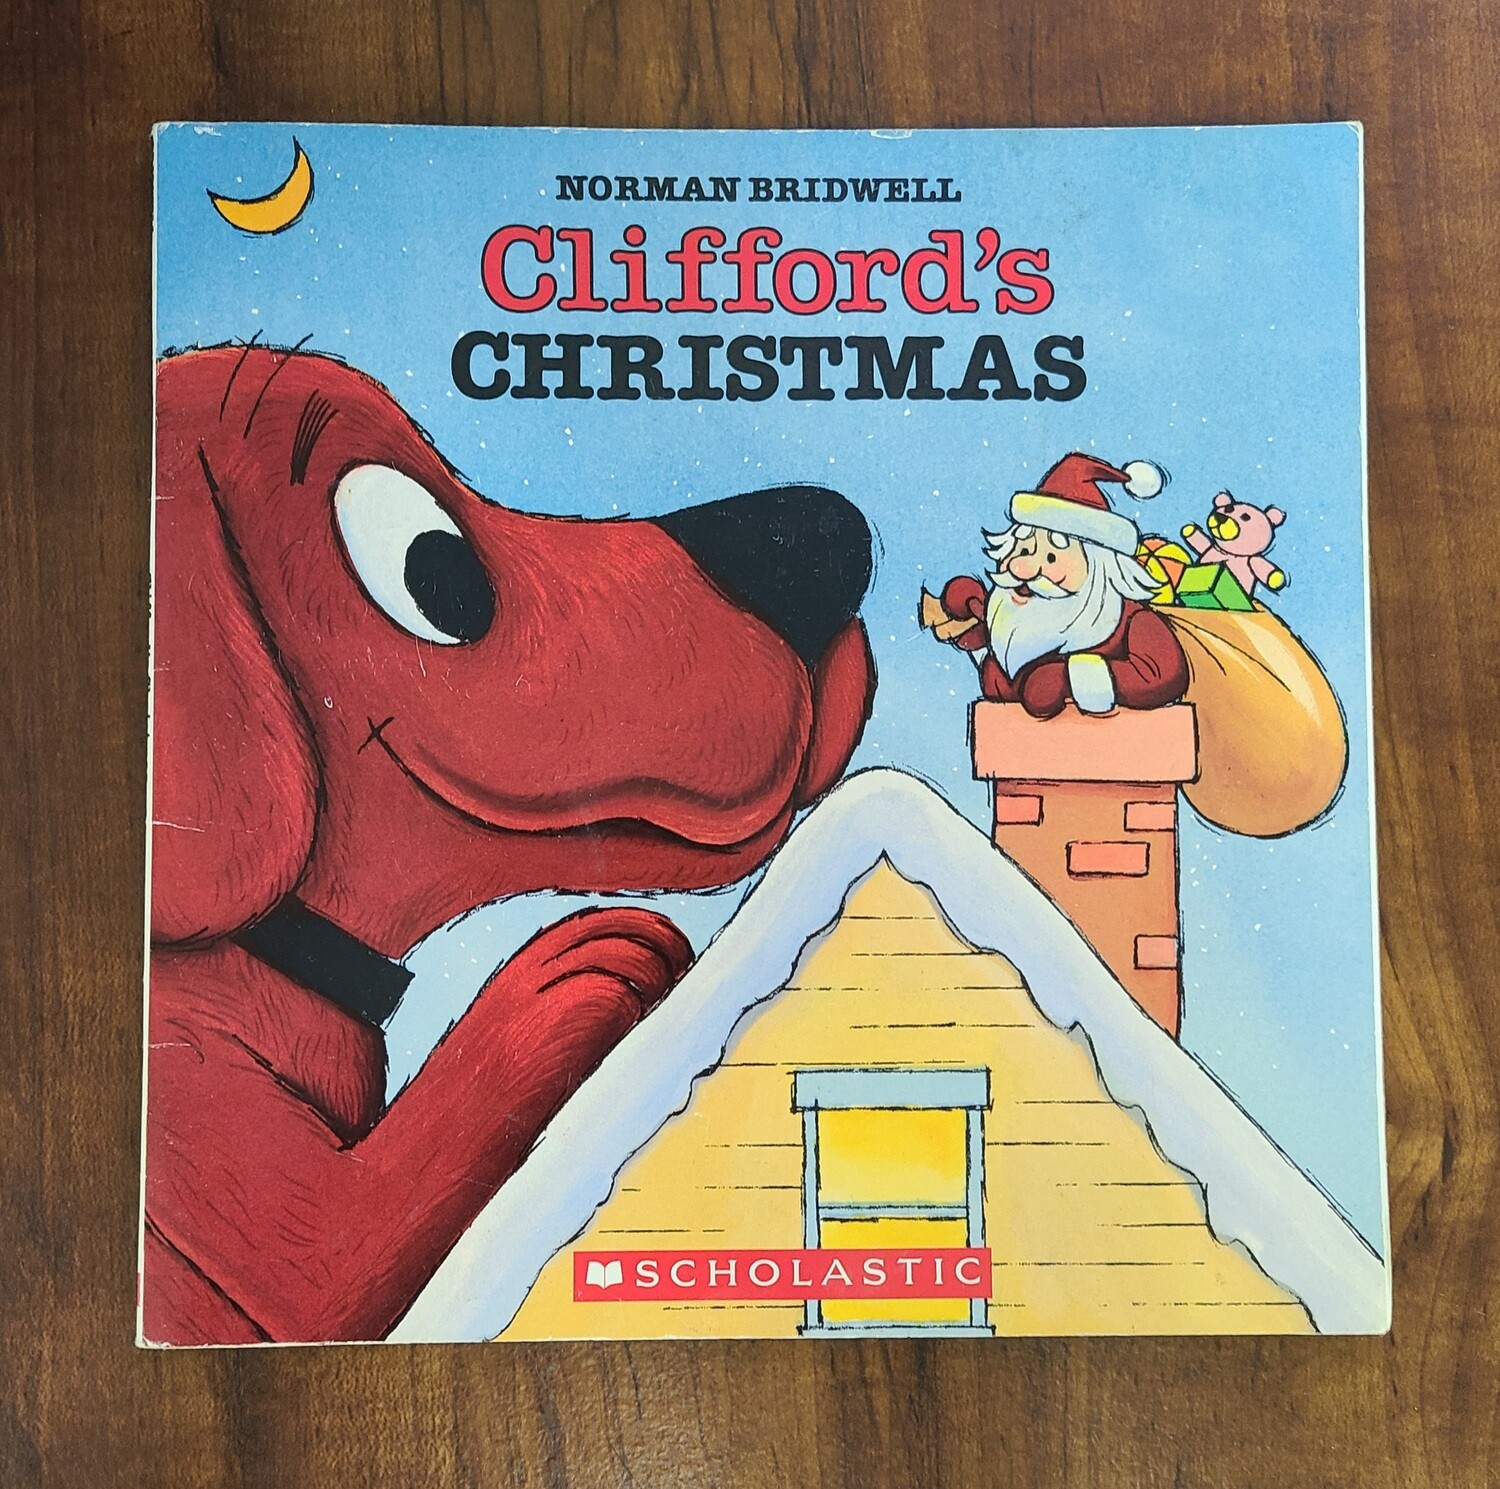 Clifford's Christmas by Norman Bridwell